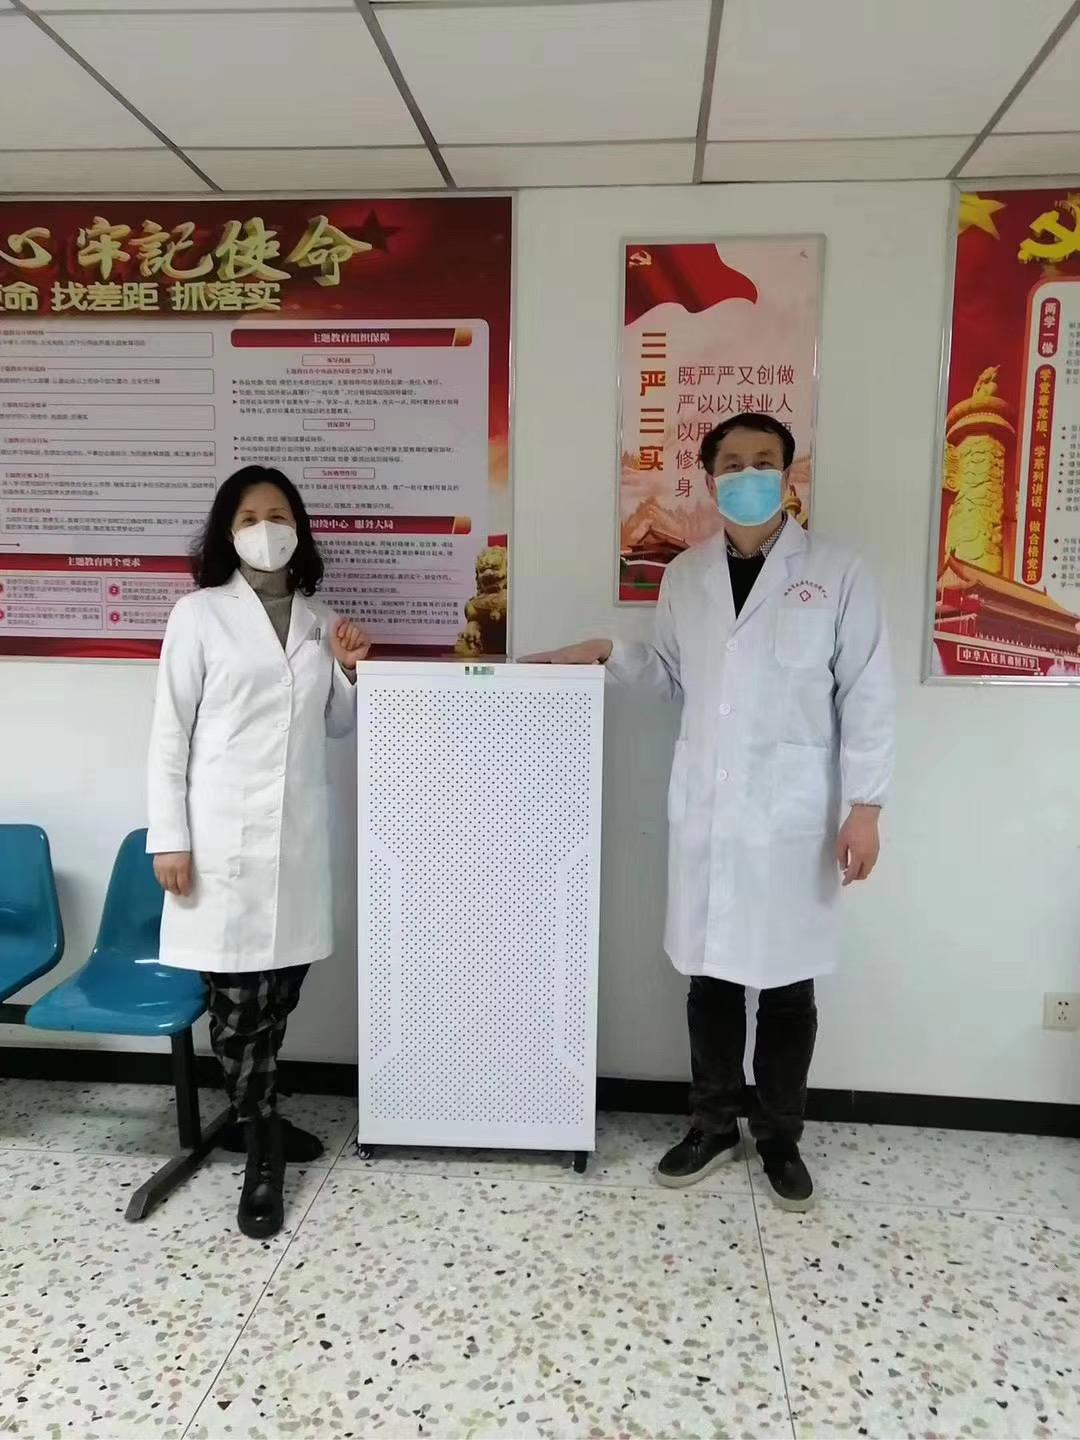 Air Disinfection Medical Dental Clinic Home Sterilizer Disinfection Equipment